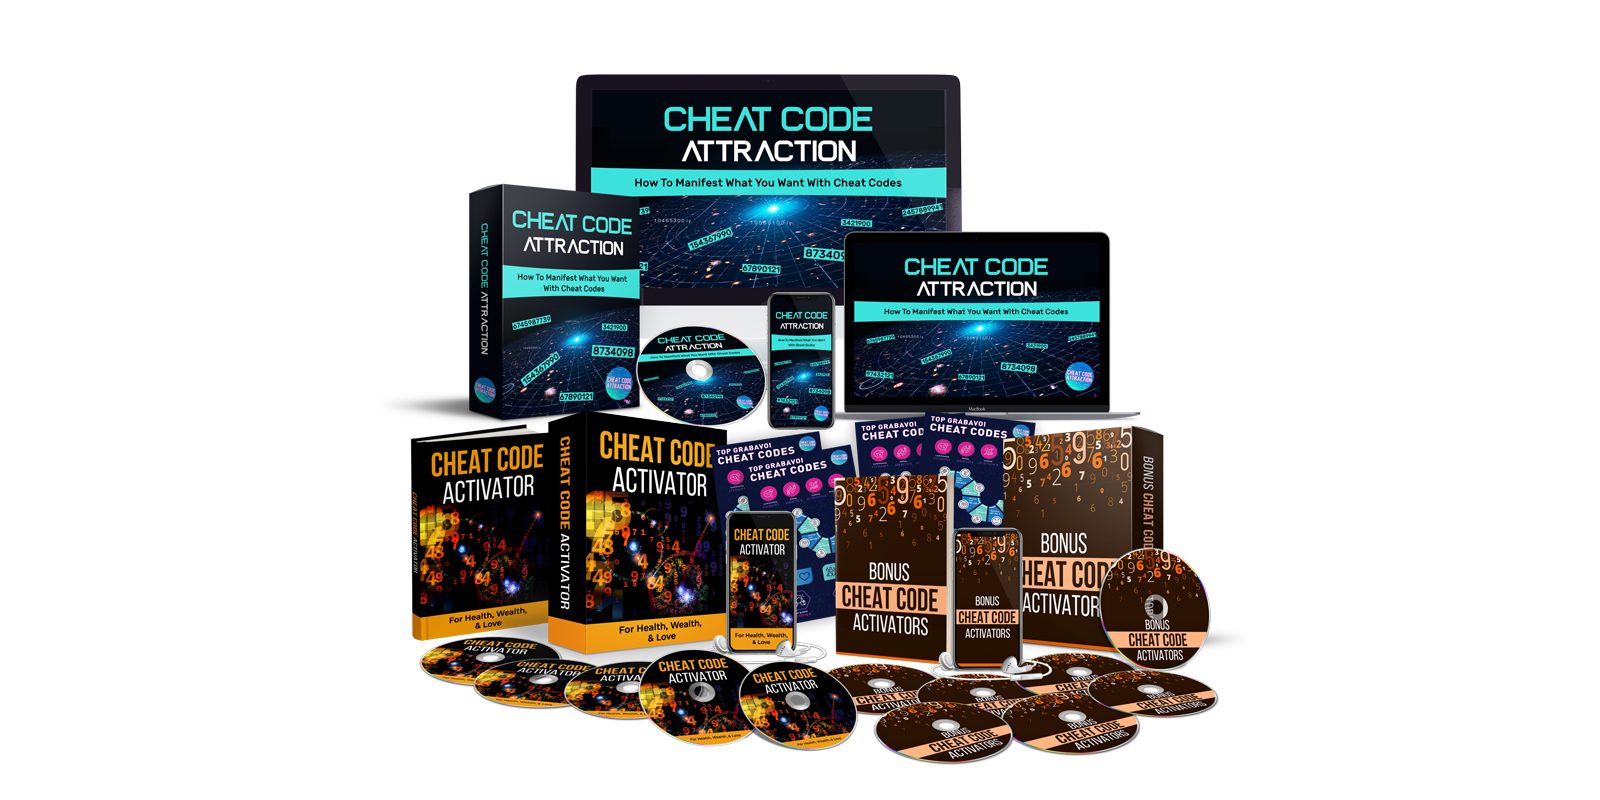 Cheat Code Attraction reviews